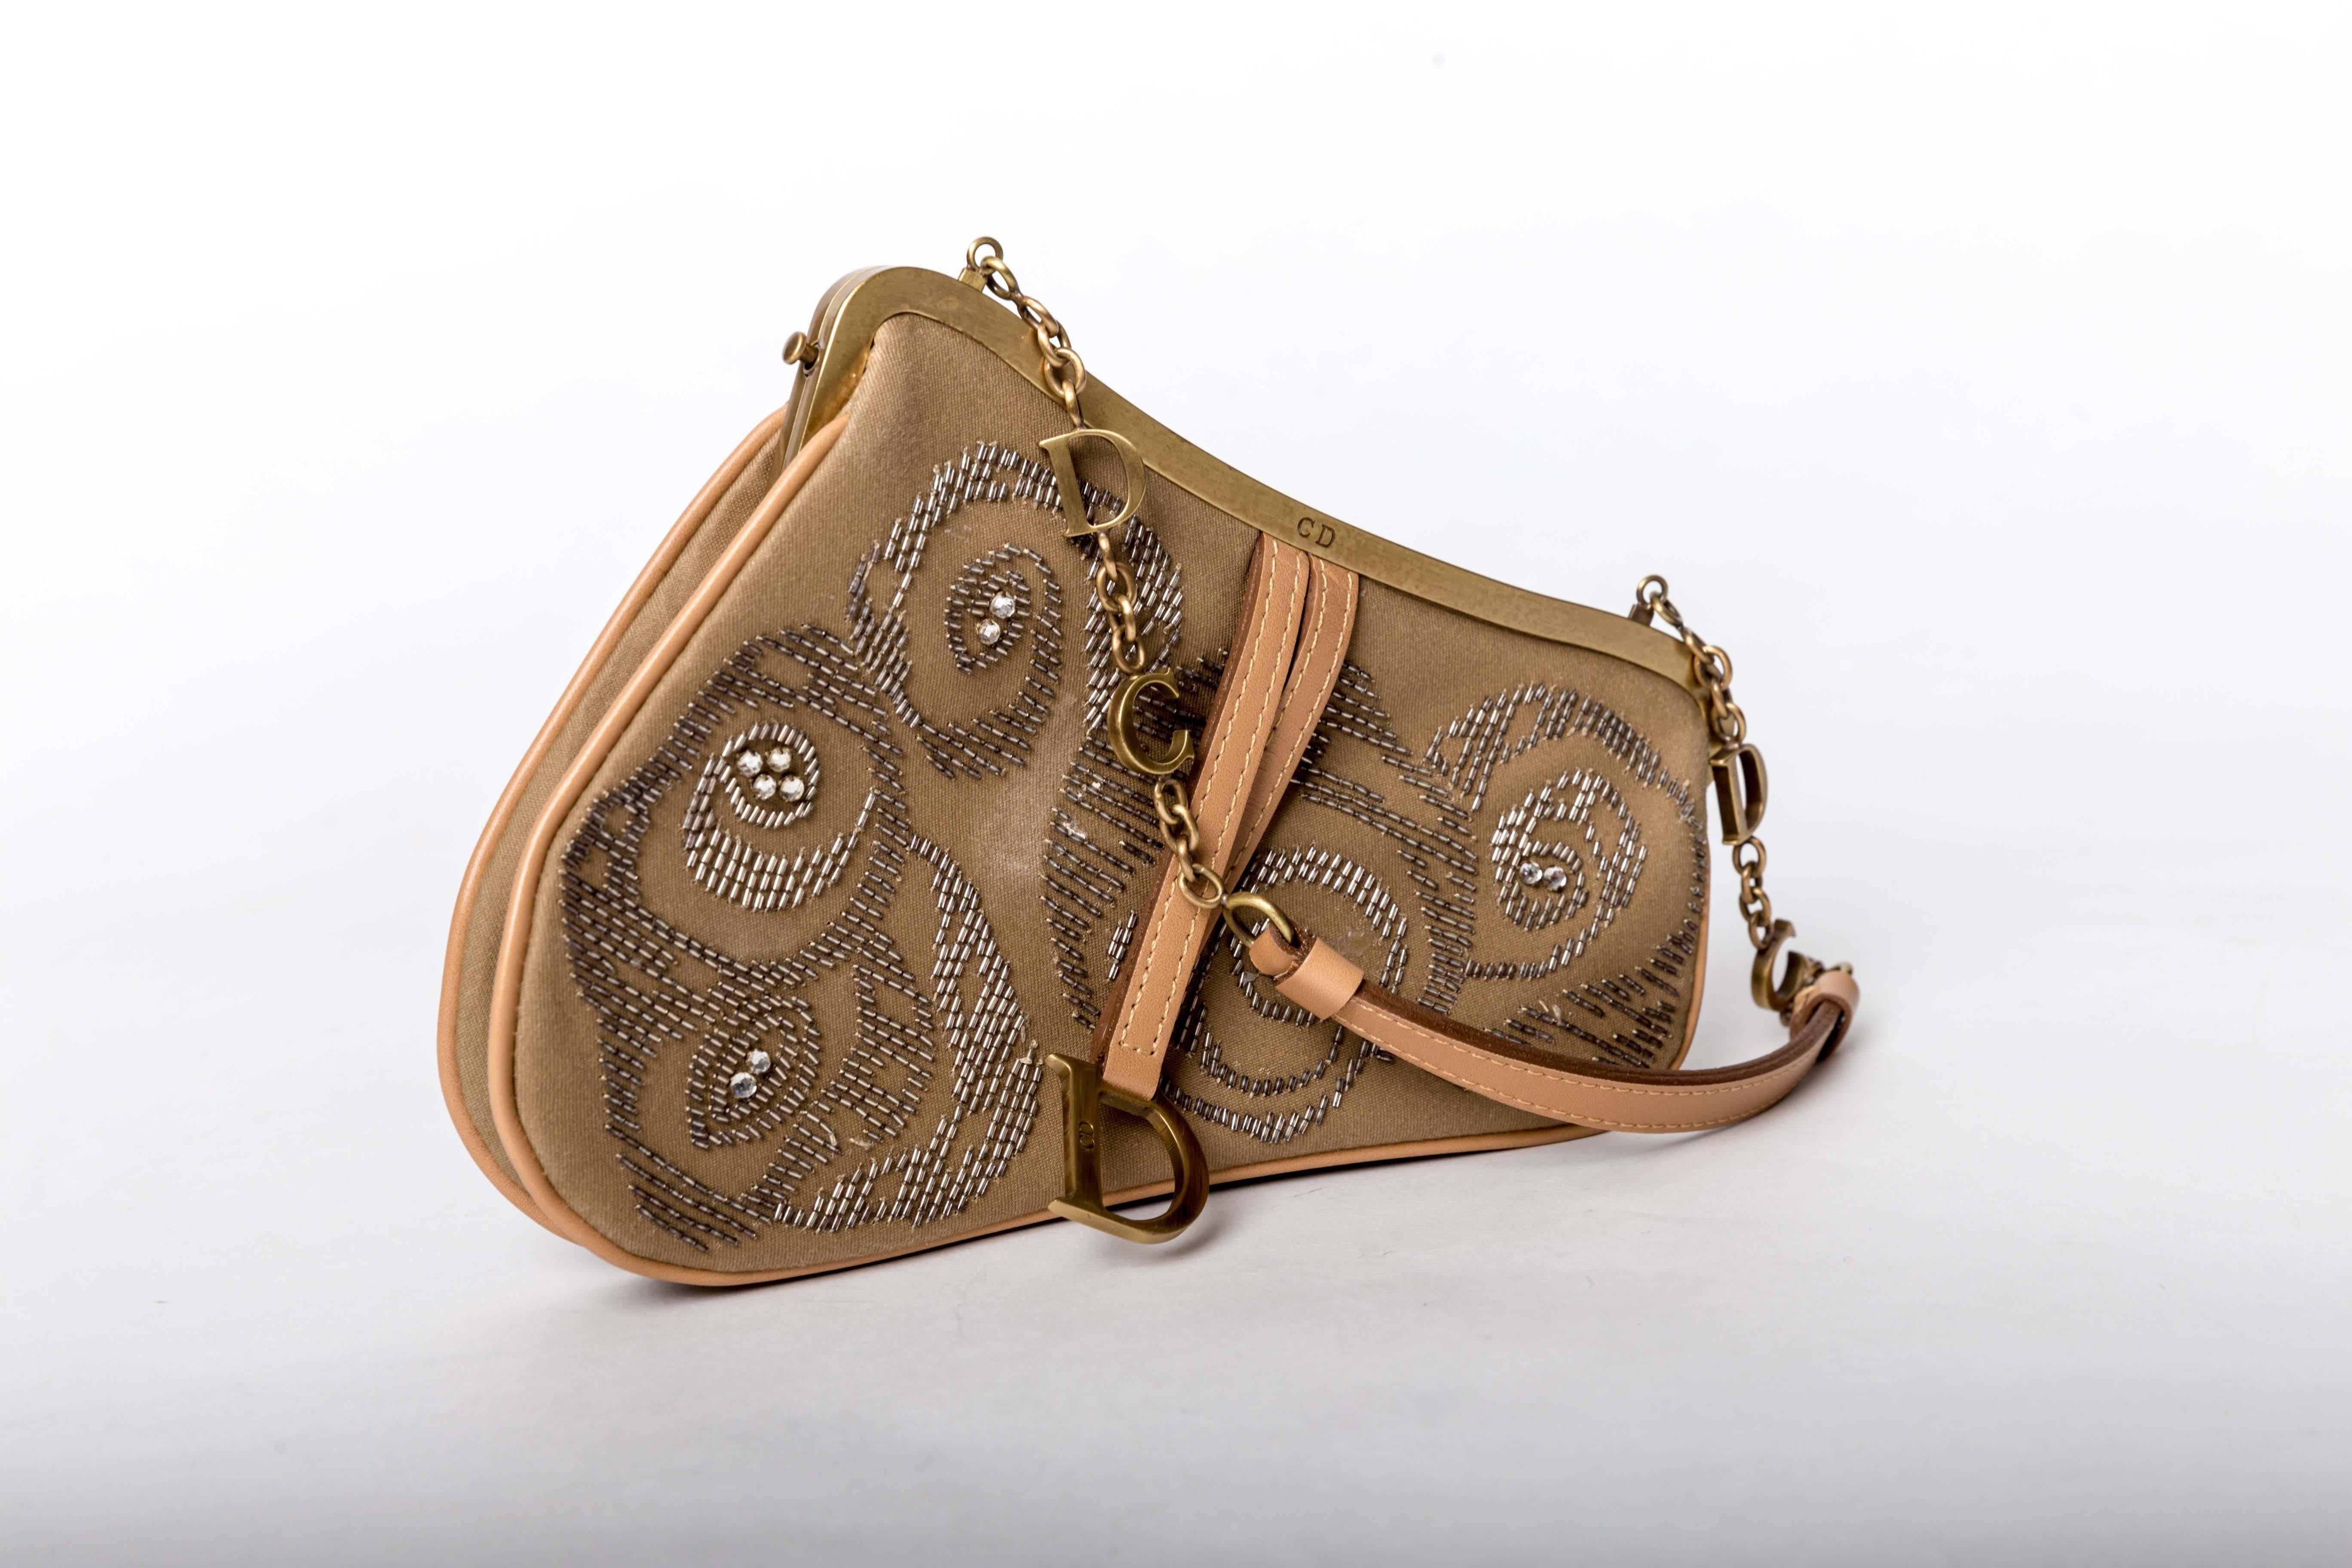 Christian Dior Limited Edition Mini Beaded Saddle Bag with Gold Logo Hardware features tan fabric with natural leather trim, patterned beading and crystals, one interior flat pocket encasing a leather trimmed mirror.
Handle drop 5 inches.
Stamped